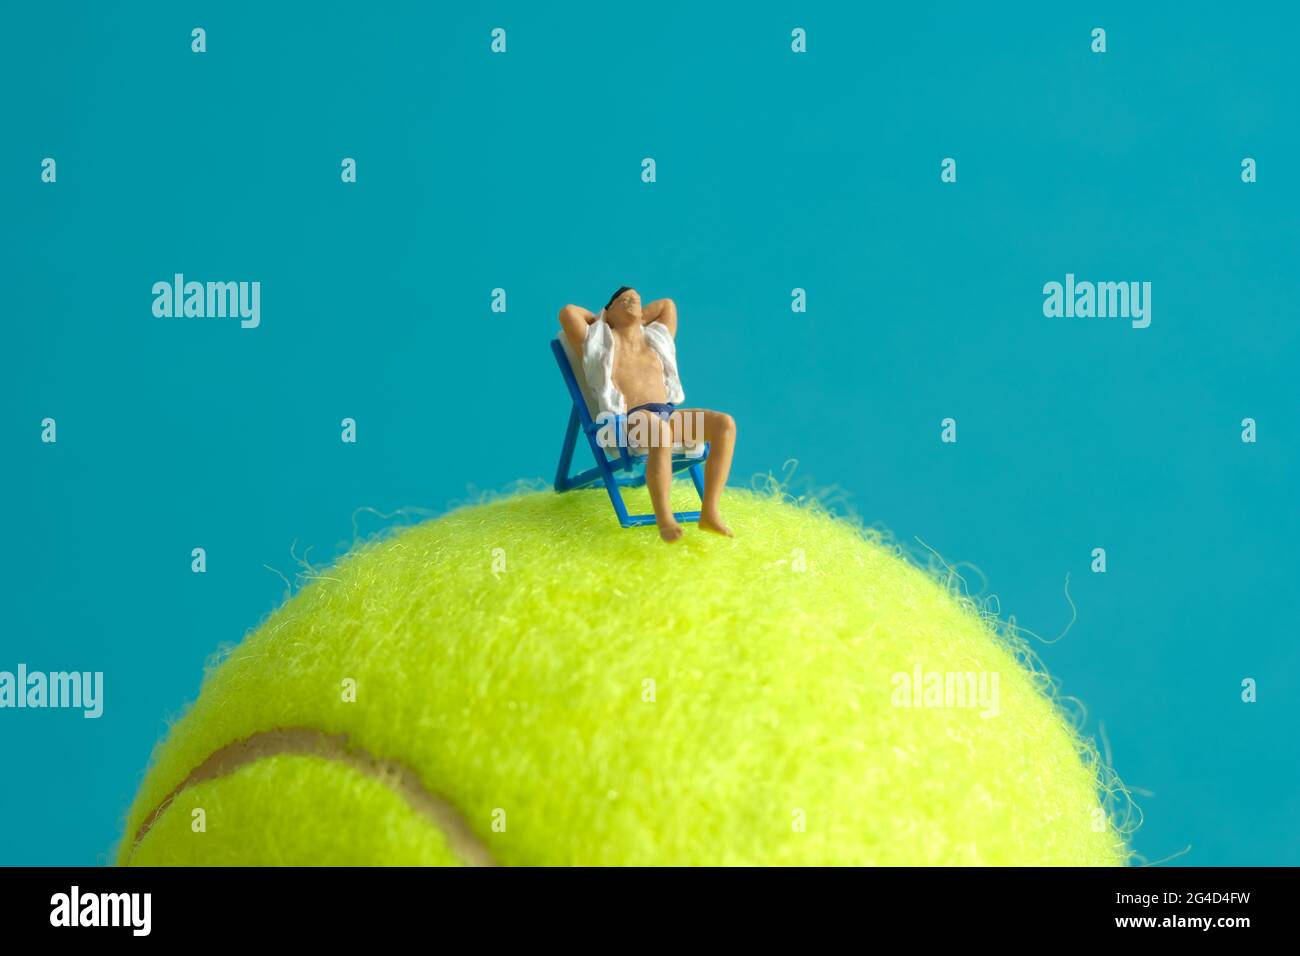 Miniature people toy figure photography. Travel destination concept, Men relaxing at beach chair above tennis ball, isolated on blue background. Image Stock Photo